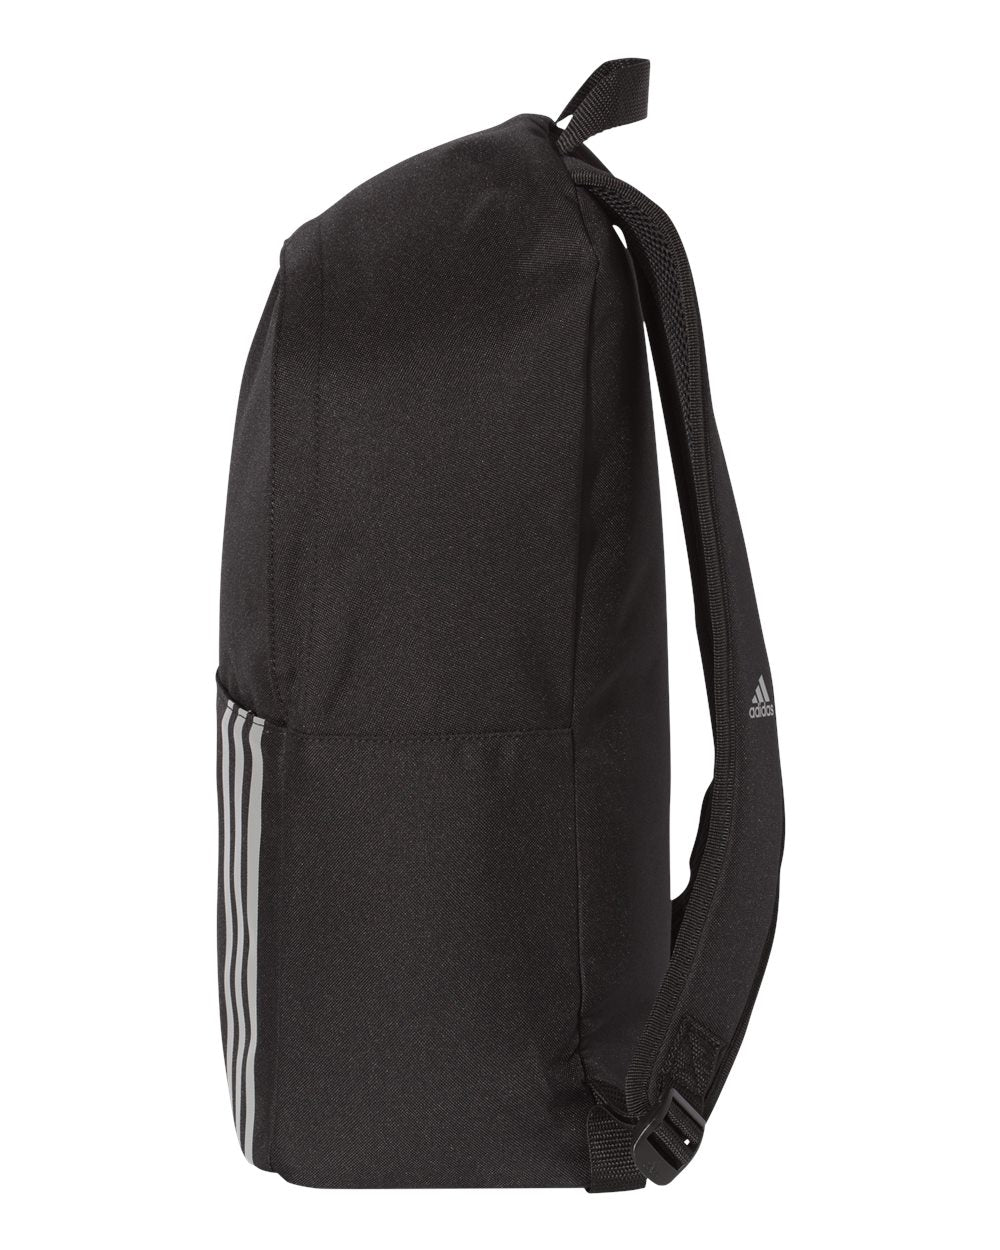 Cosmos 18L 3-Stripes Adidas Backpack - Redwolf Jersey Works